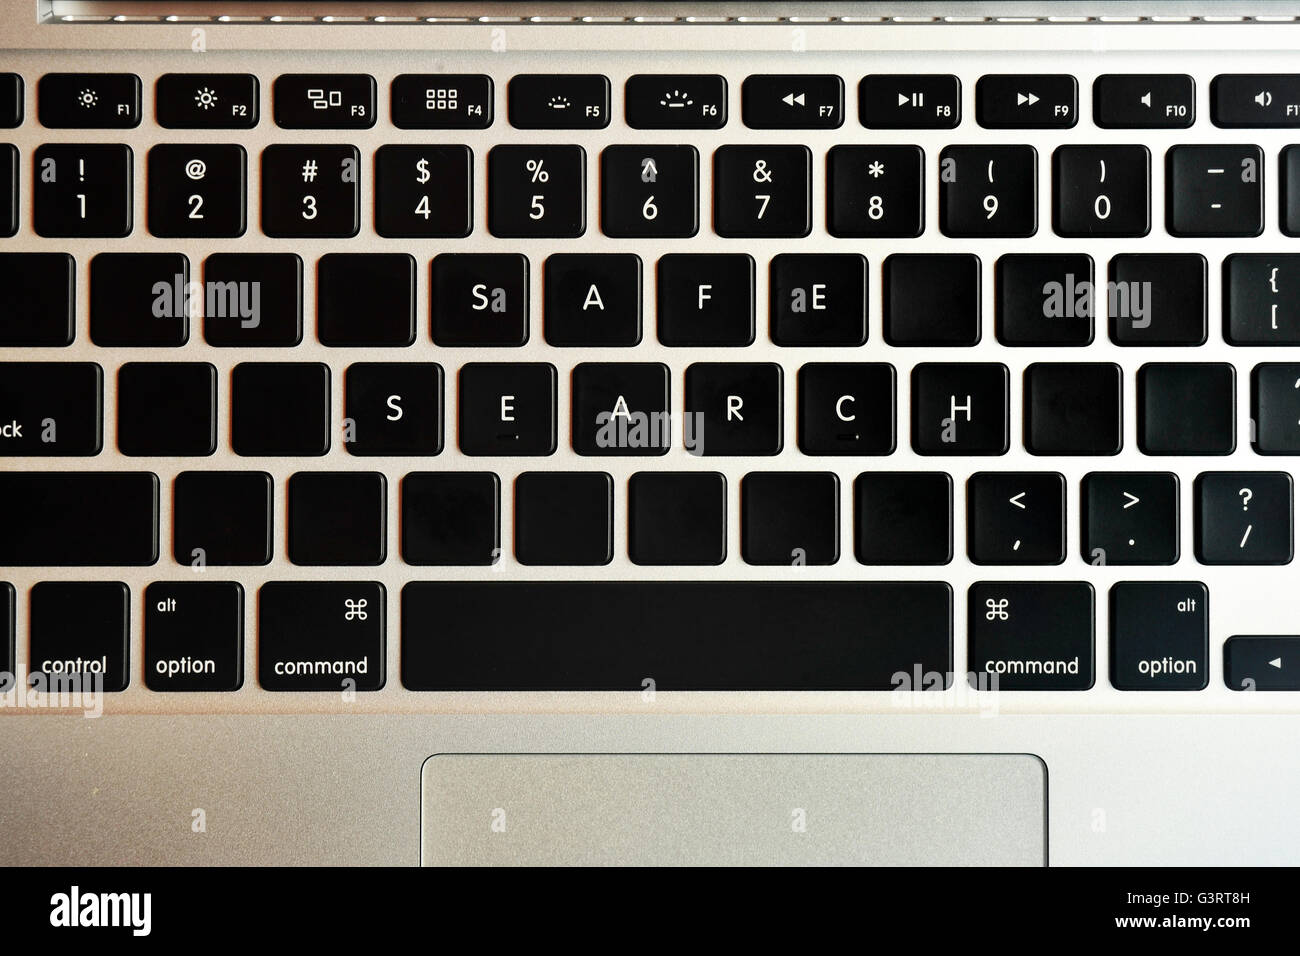 how to search in mac book with the keyboard